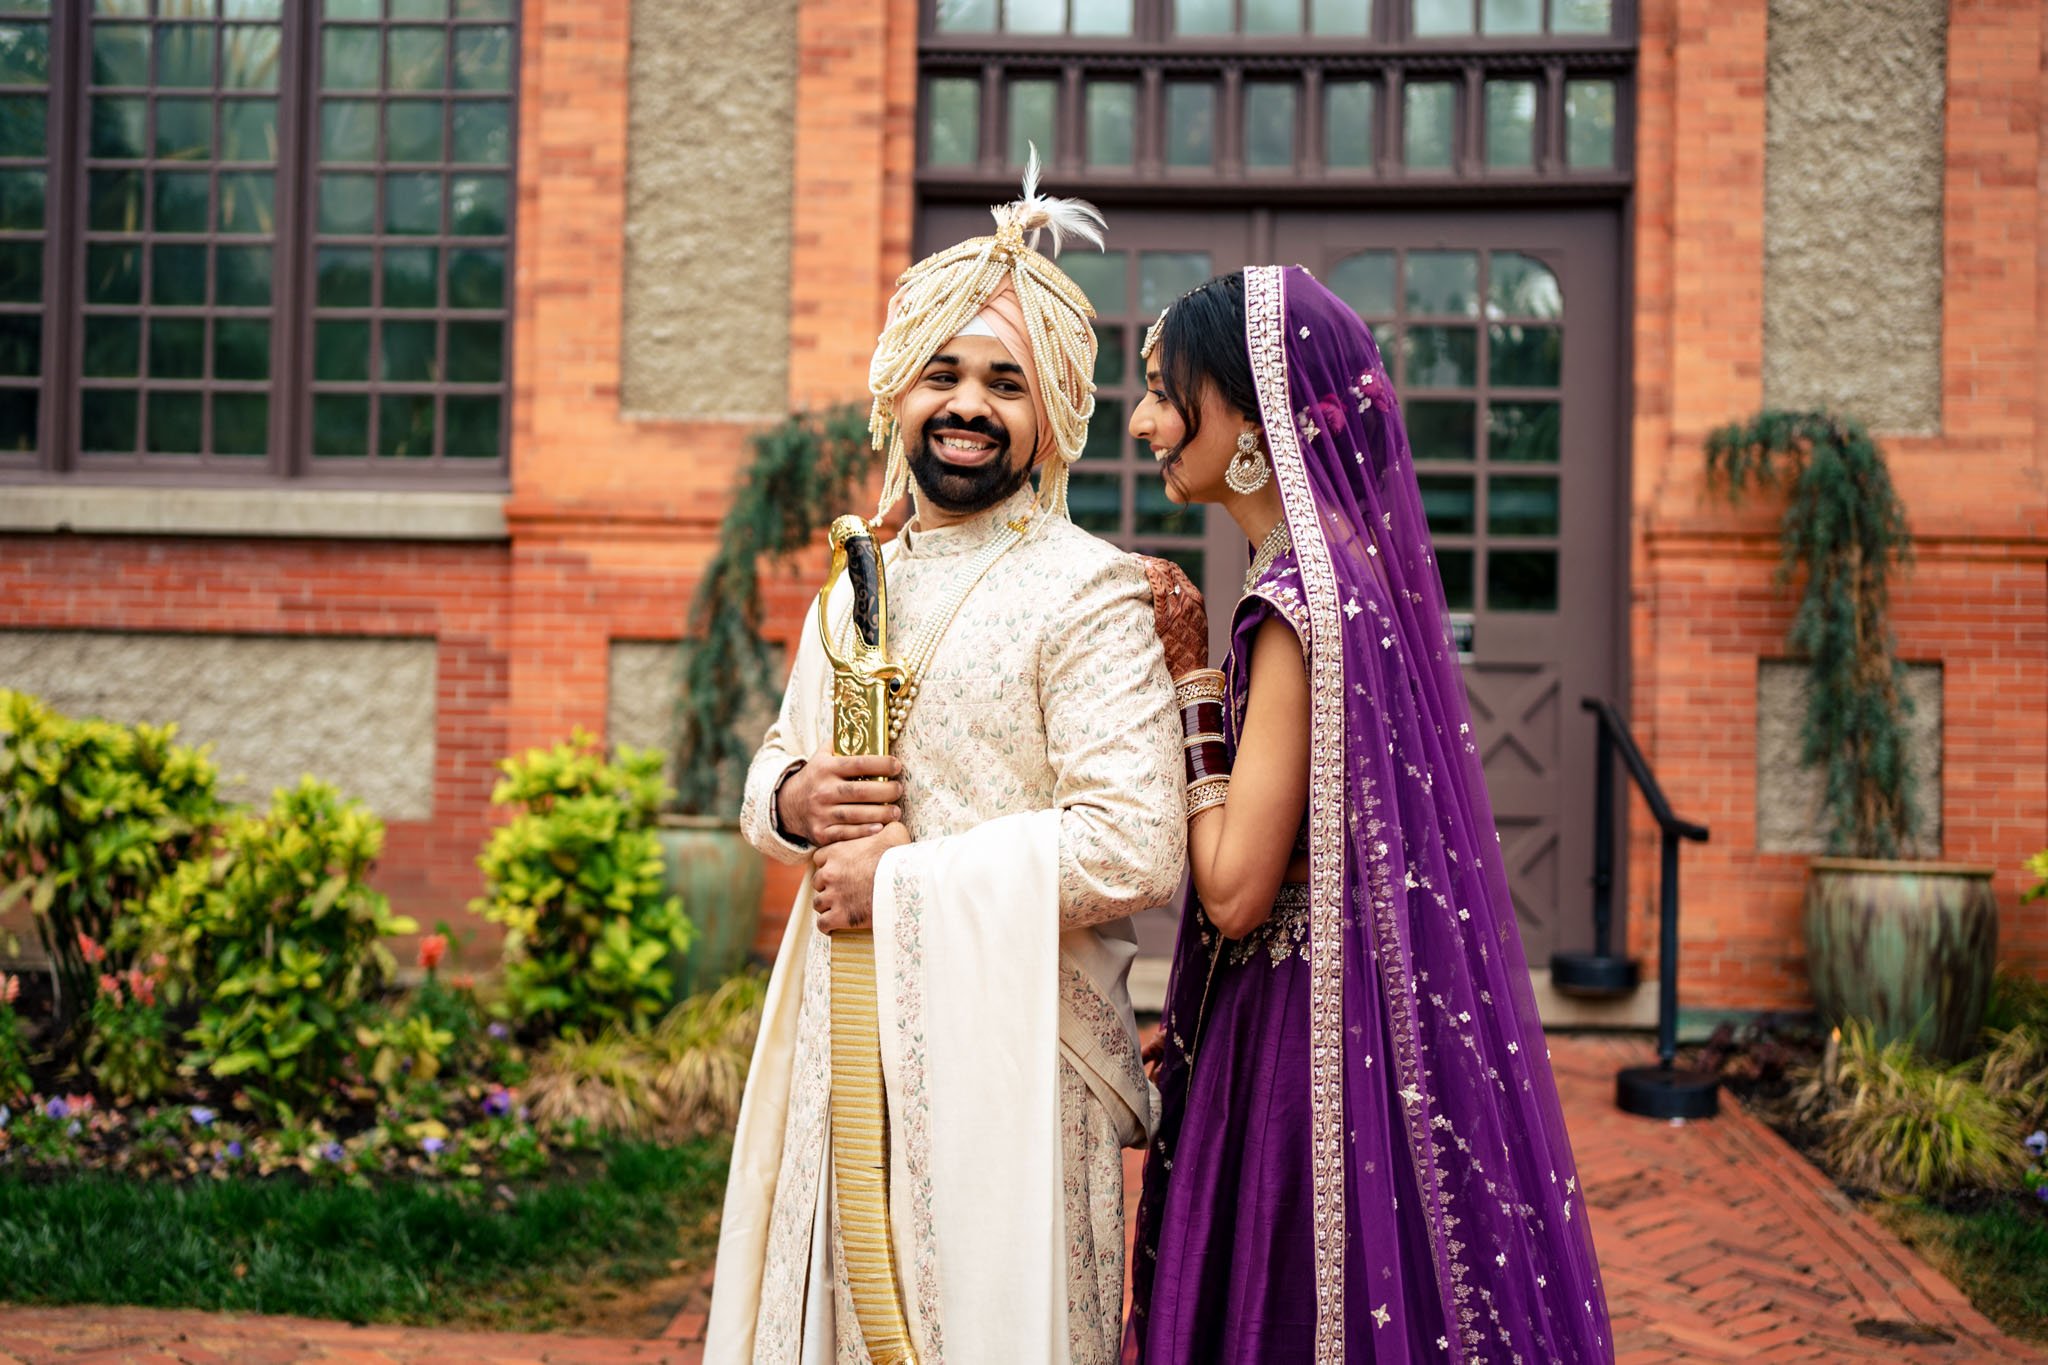 An Indian bride and groom standing in front of the Biltmore Estate building on their wedding day.